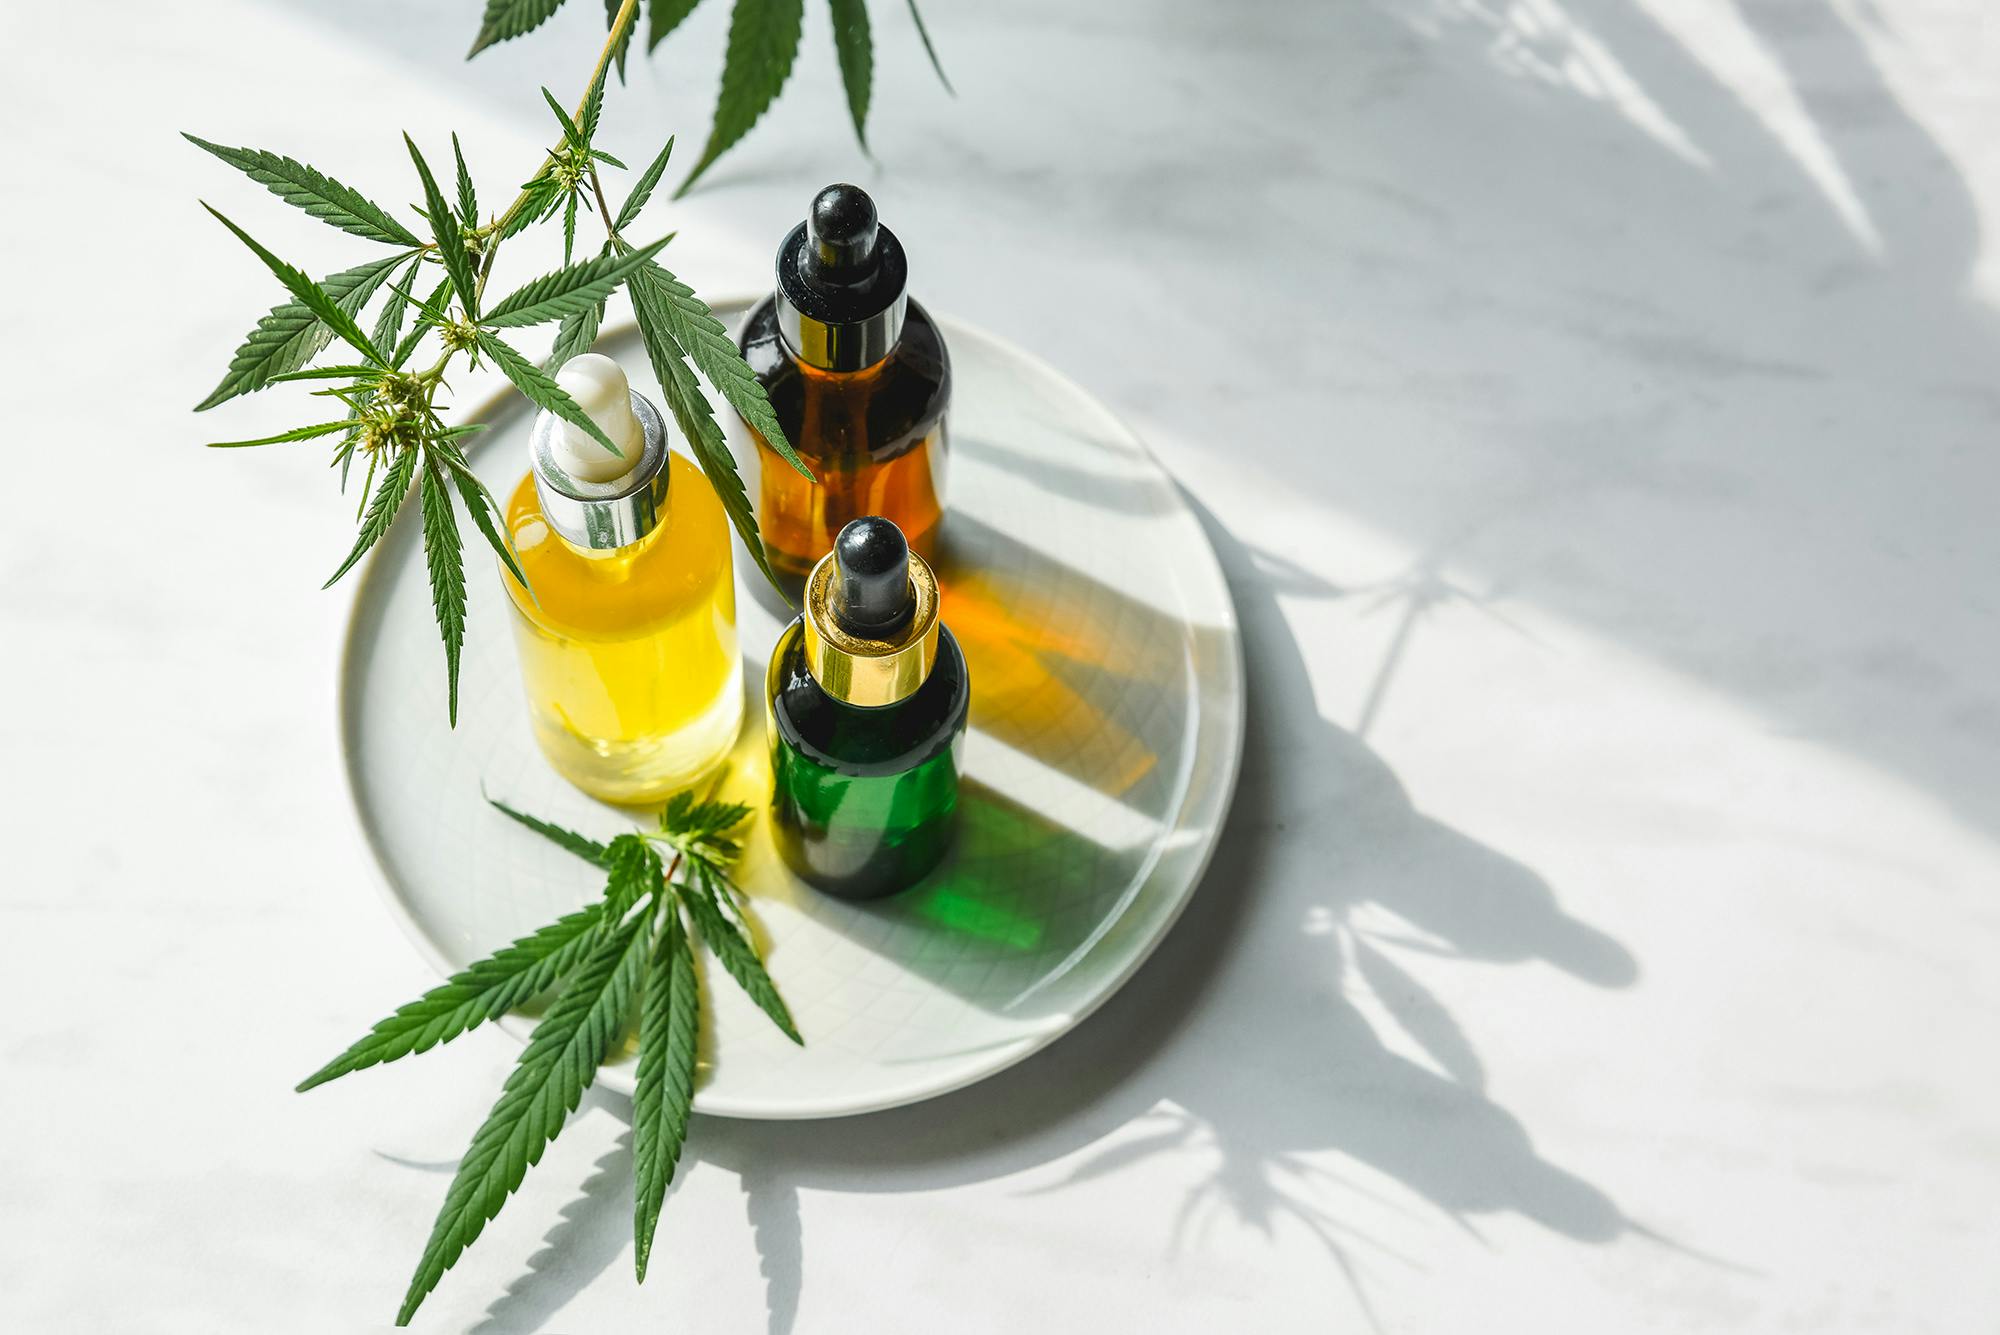 Different glass bottles with CBD OIL, THC tincture and cannabis leaves on yellow background. Flat lay, minimalism. Cosmetics CBD oil.